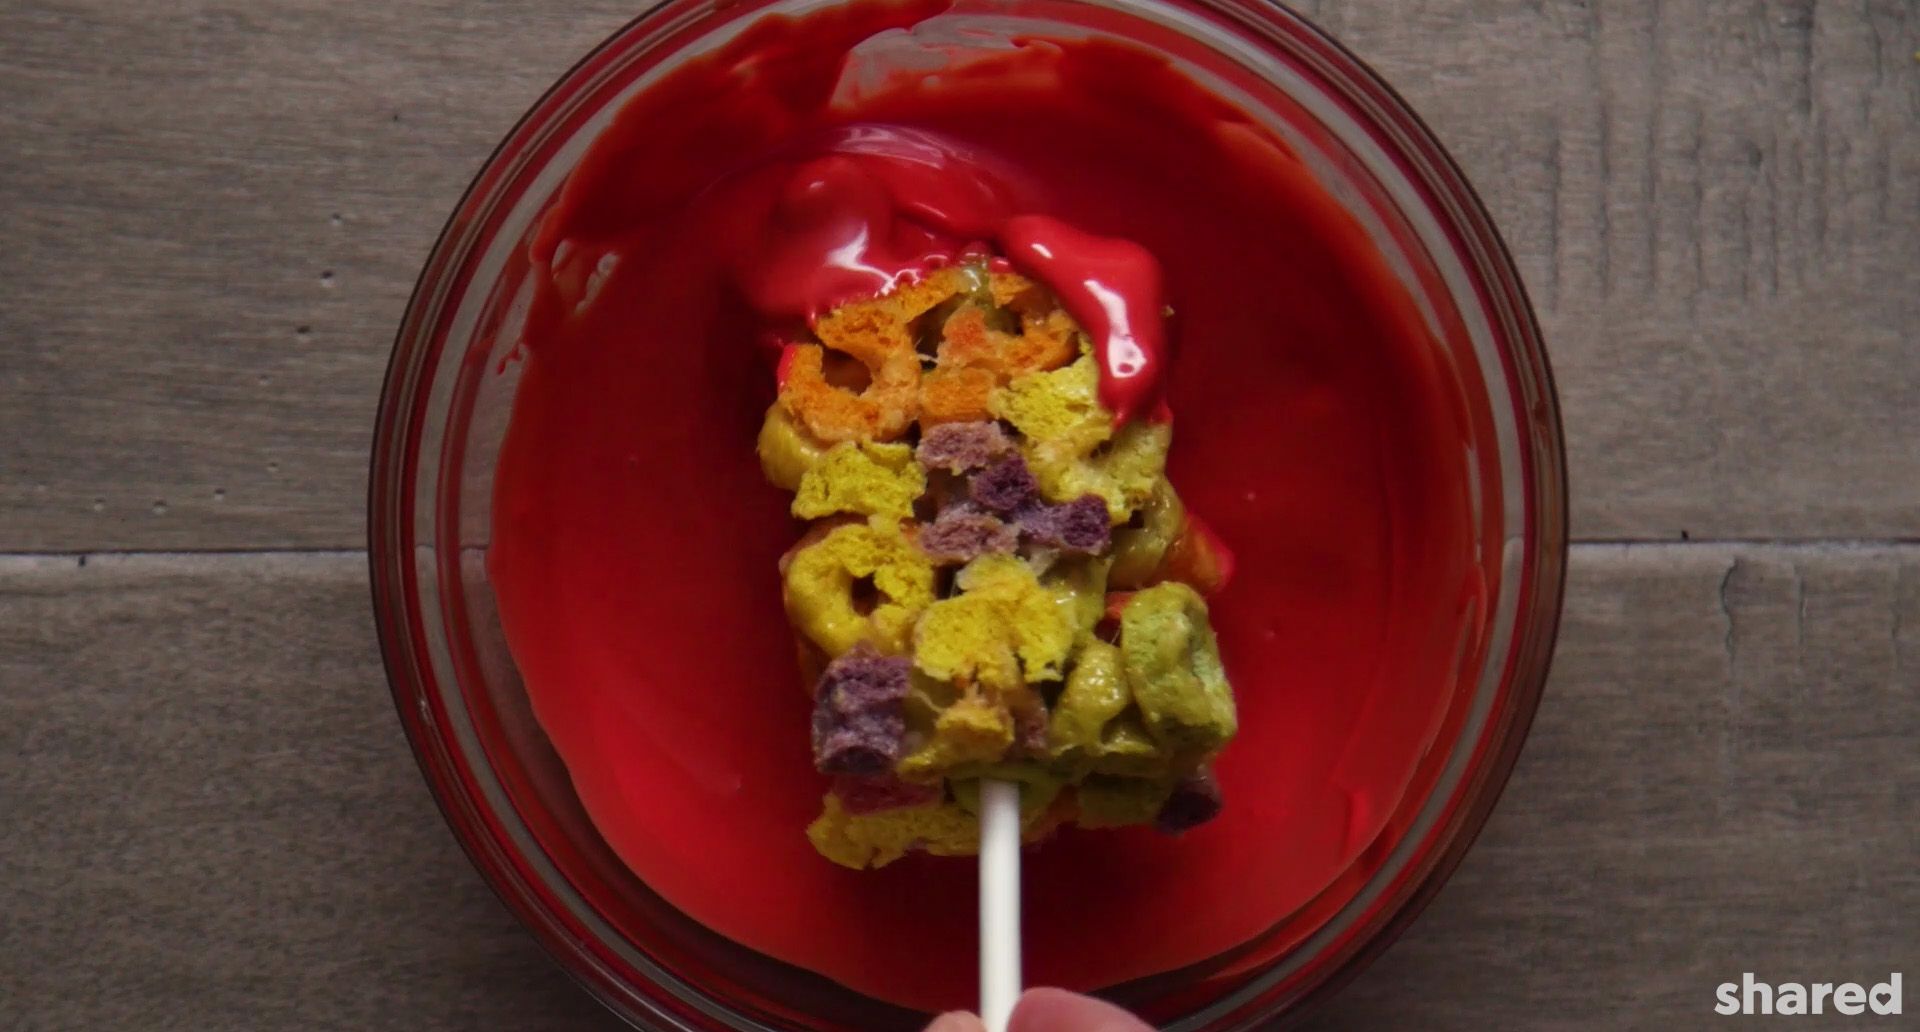 Fruit Loop Snack being dipped into a melted red candy melts